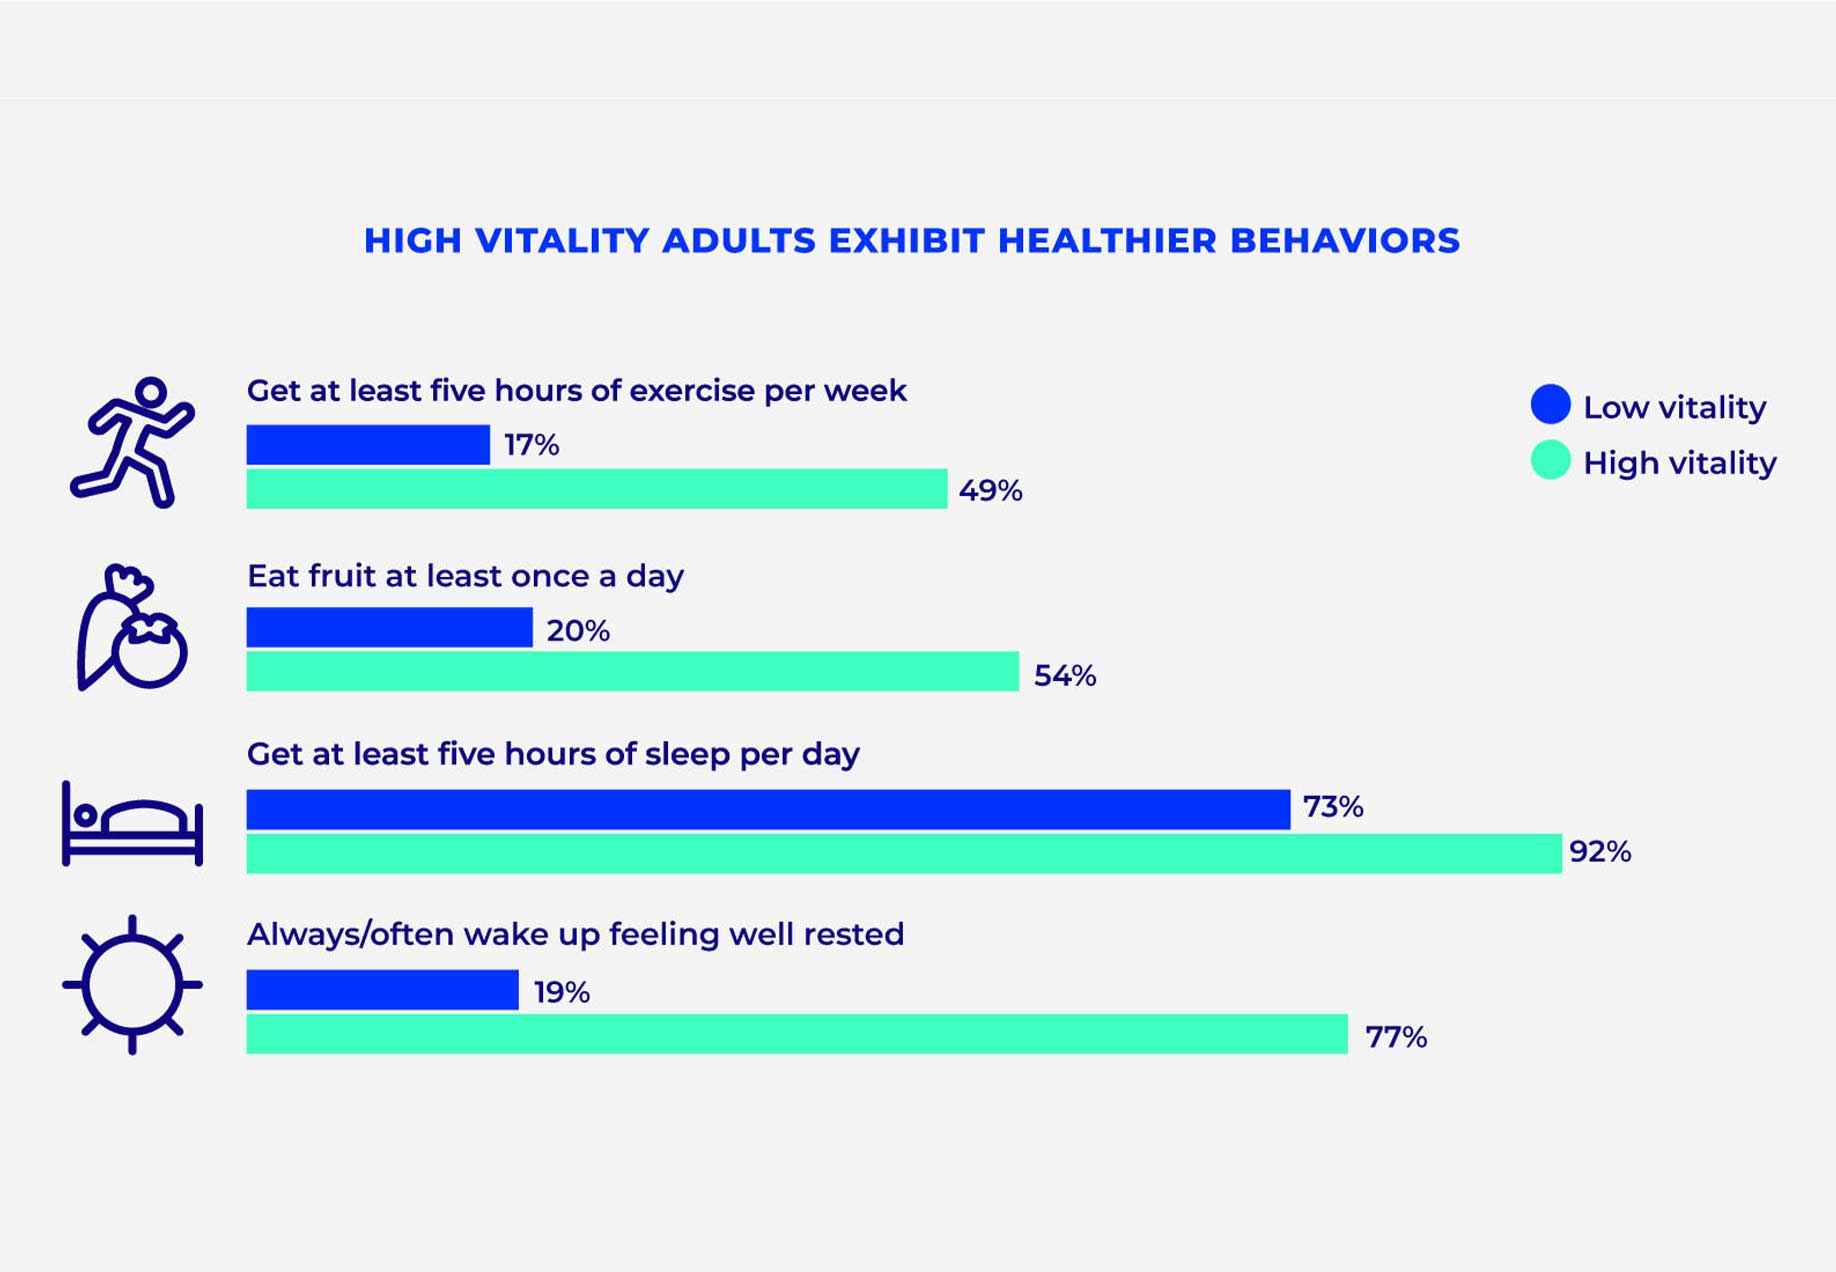 Healthy habits and health engagement are linked to higher vitality.